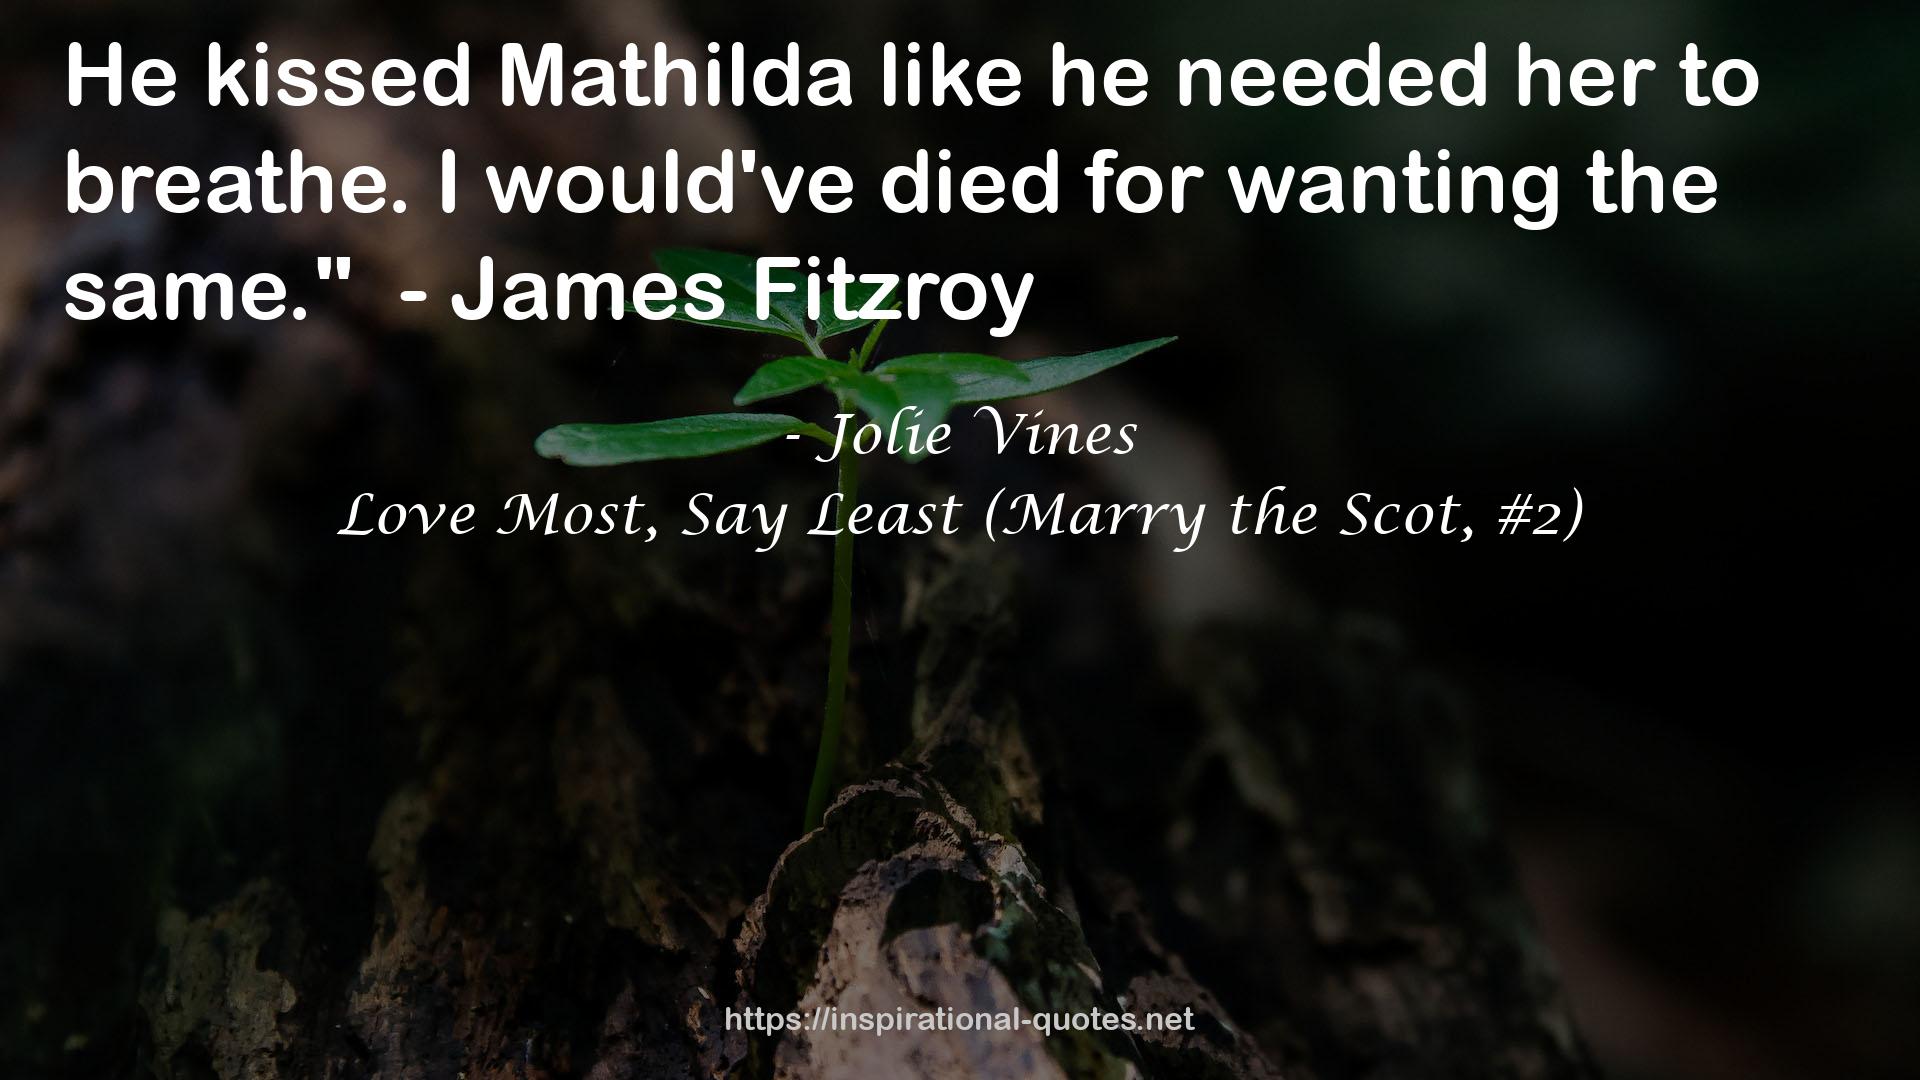 Love Most, Say Least (Marry the Scot, #2) QUOTES